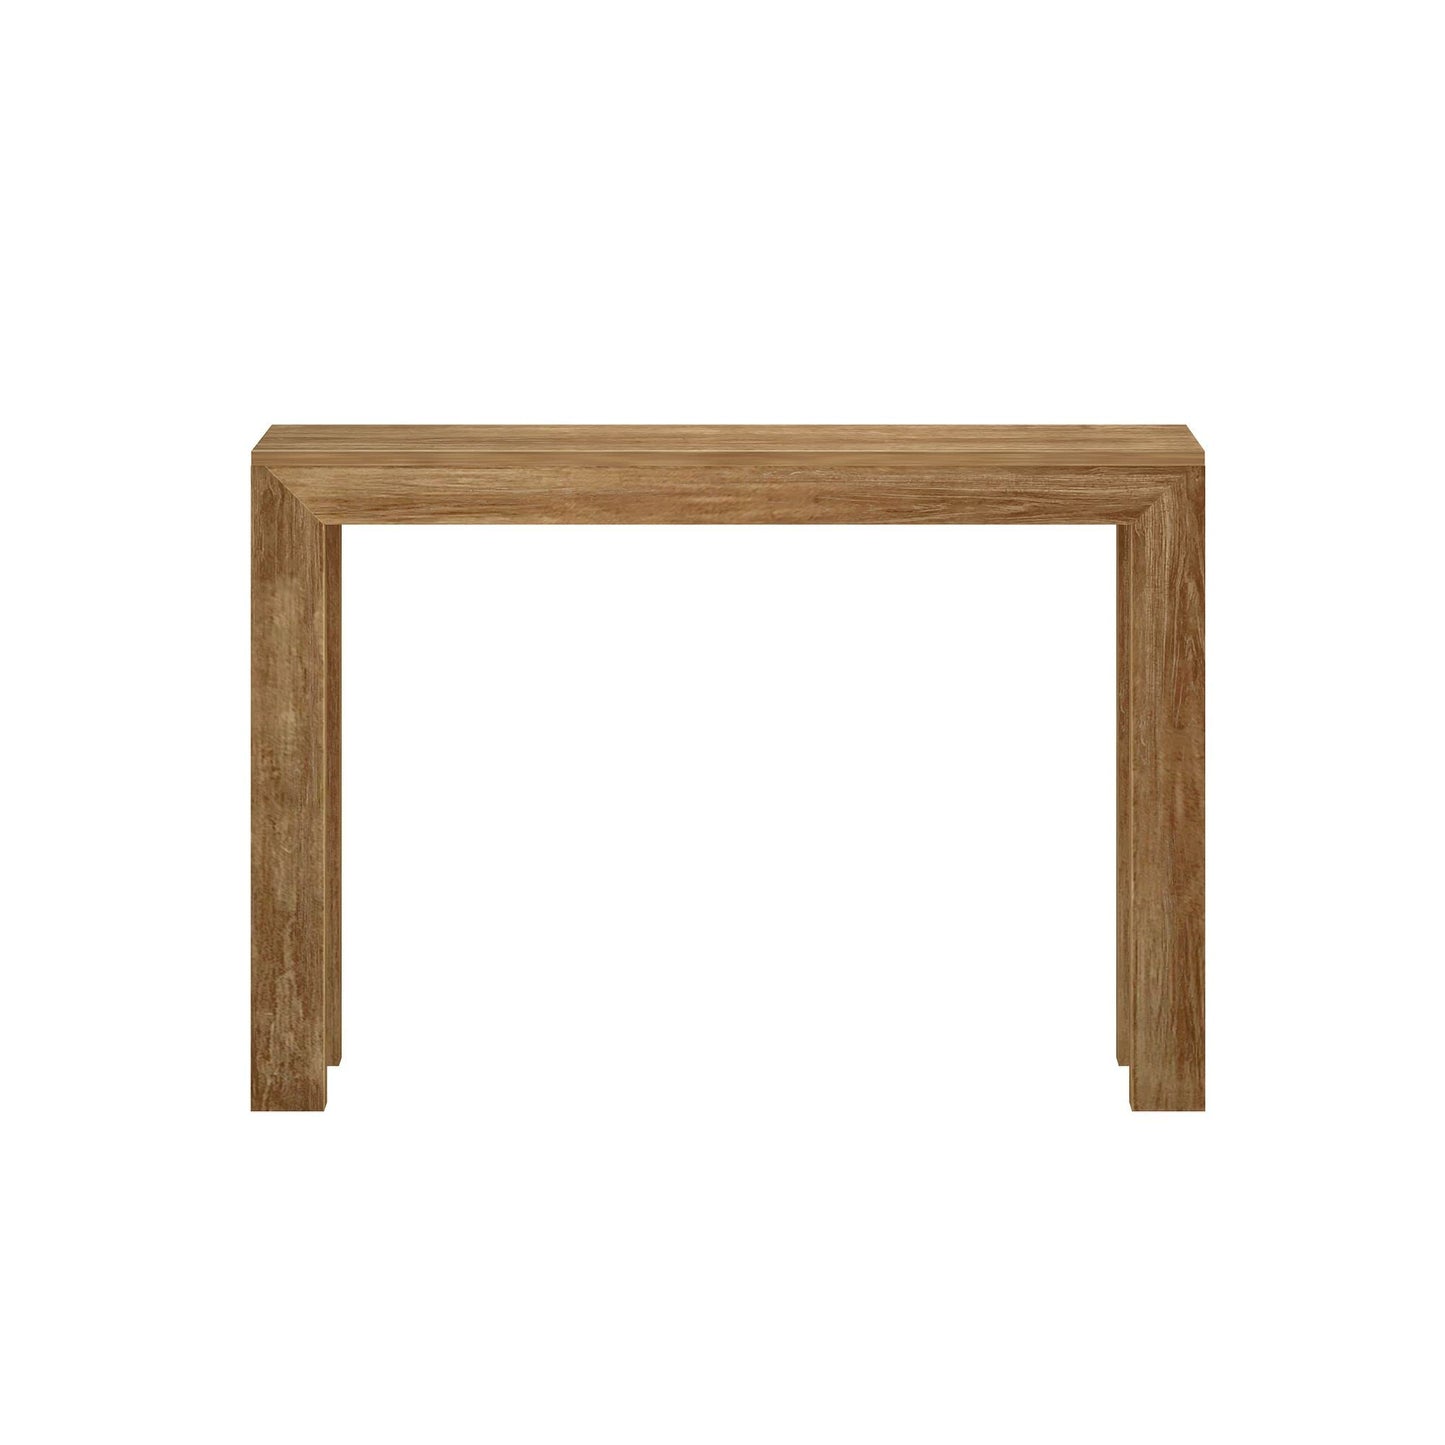 Plank+Beam Modern Solid Wood Console Table, 46.25 Inch, Sofa Table, Narrow Entryway Table for Hallway, Behind The Couch, Living Room, Foyer, Easy